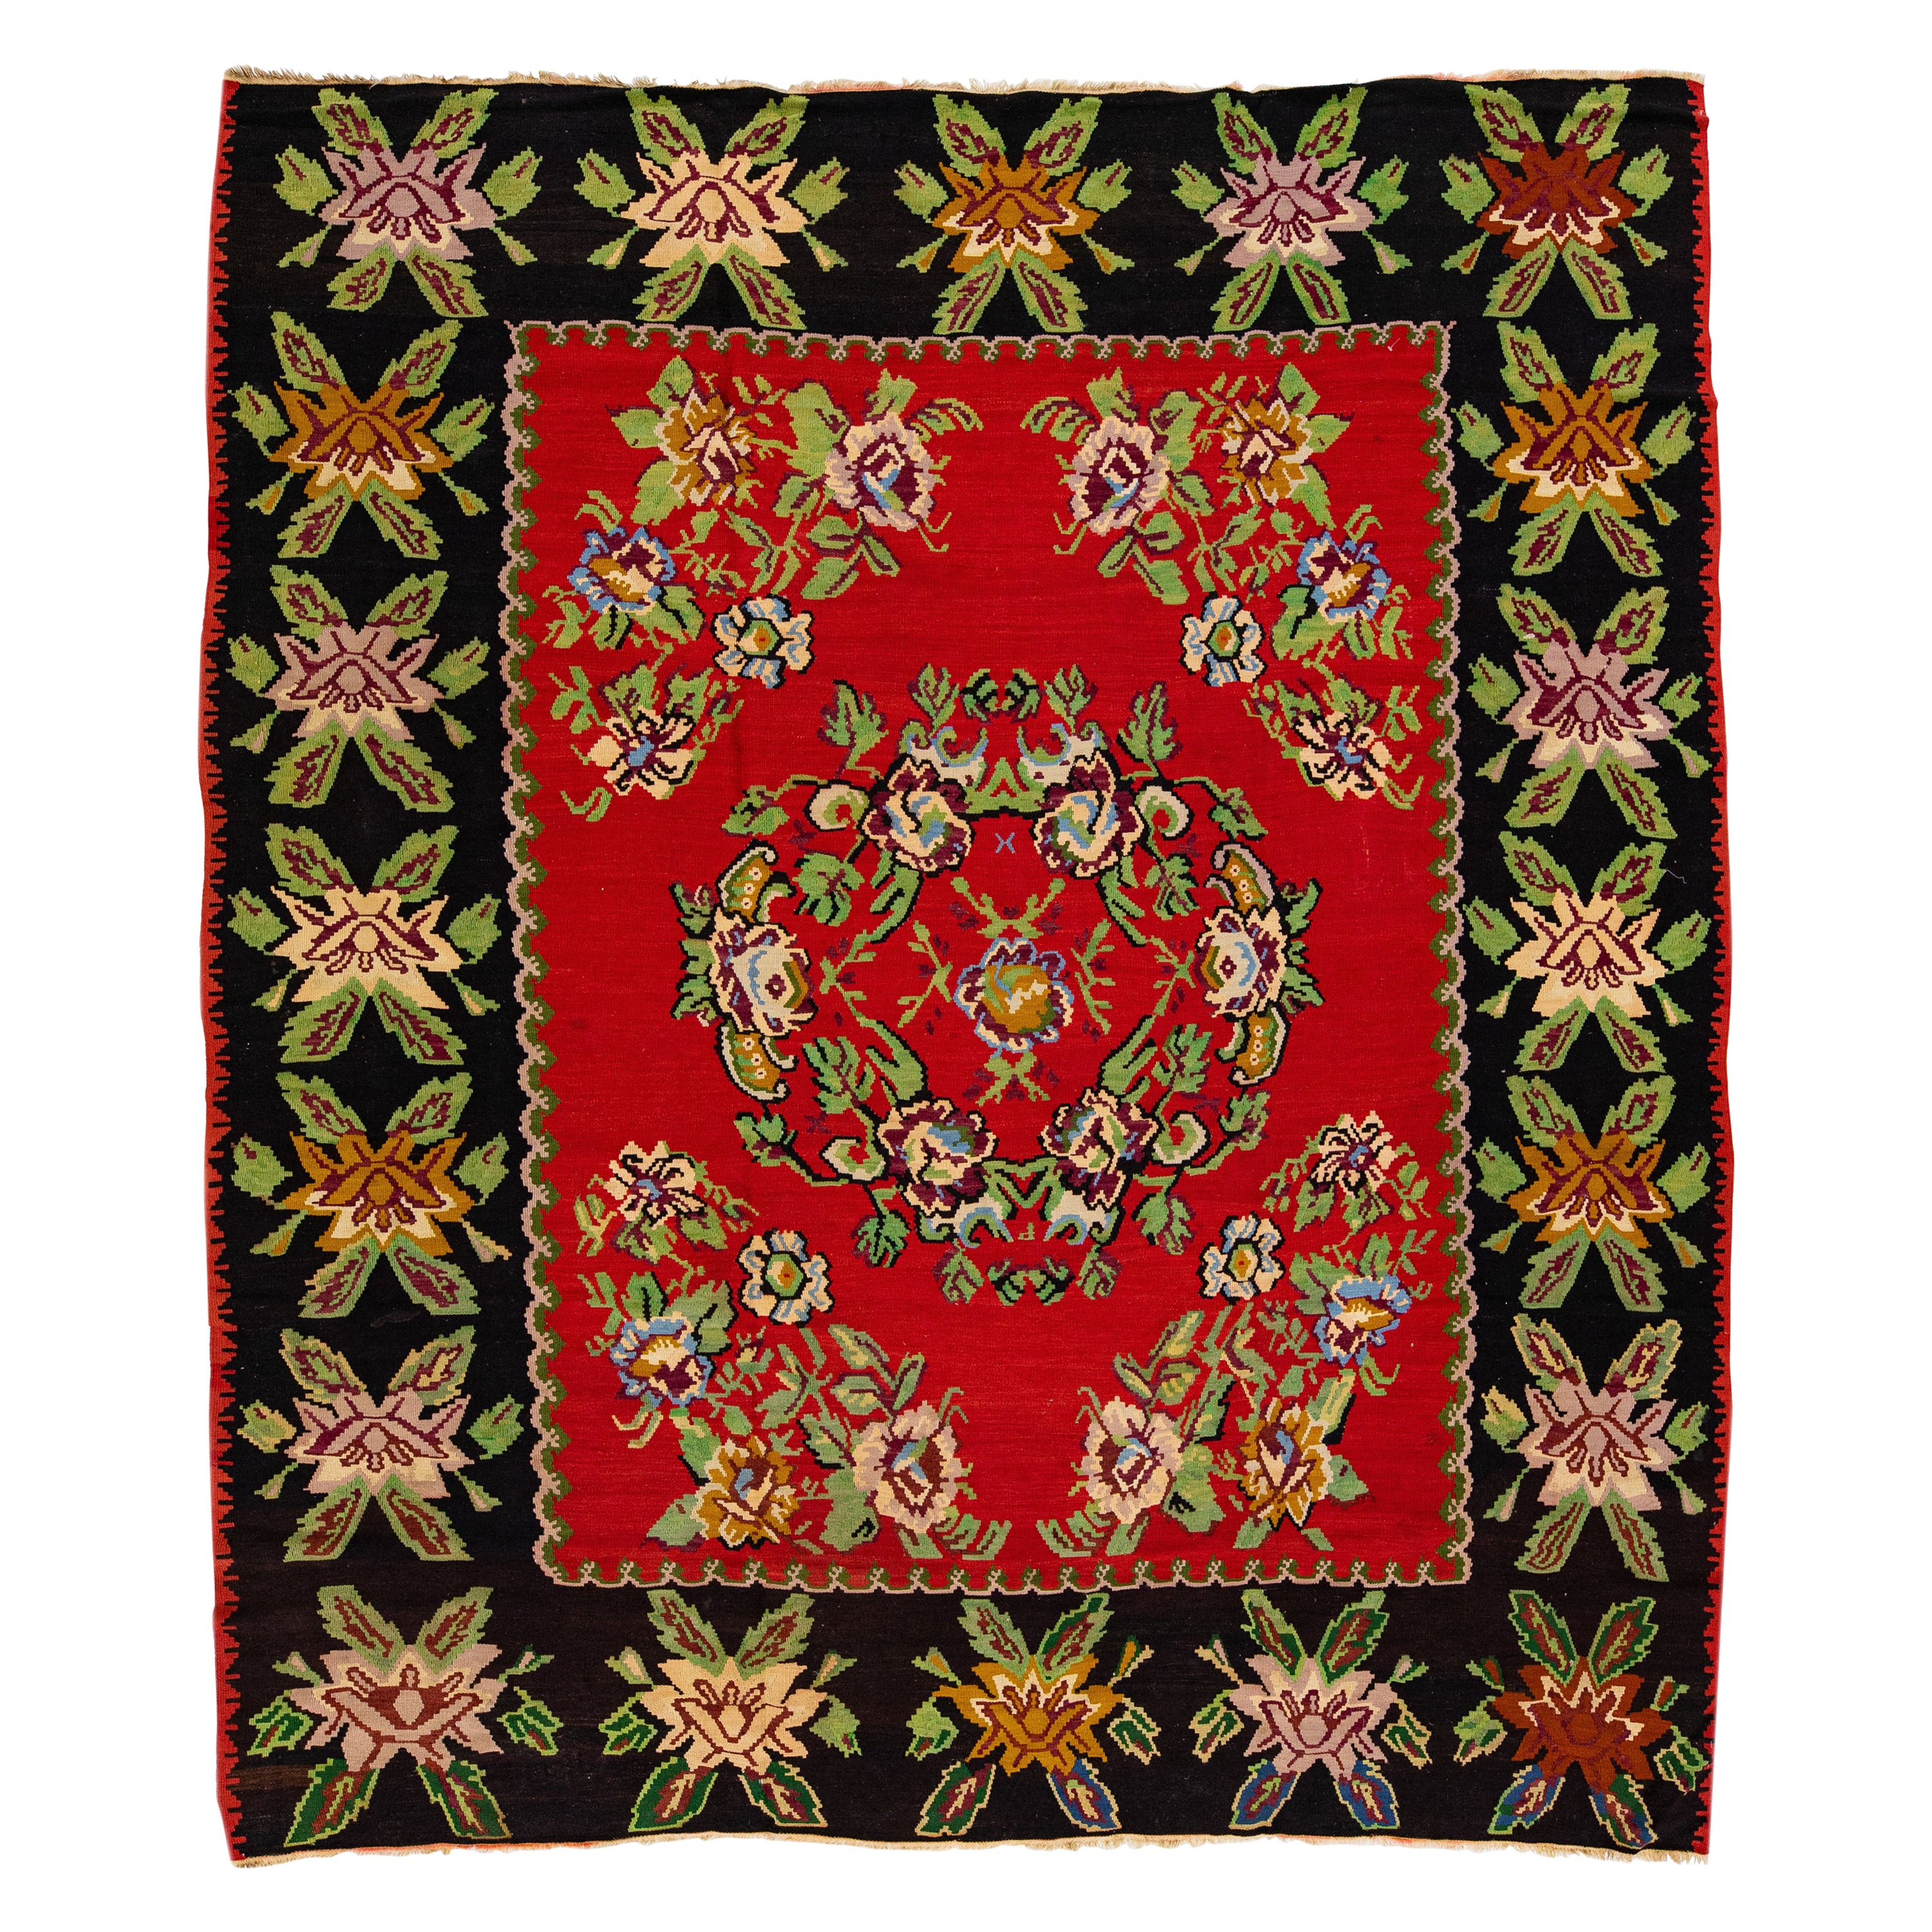 Vintage Red Bessarabian Style Kilim Wool Rug with Allover Floral Motif